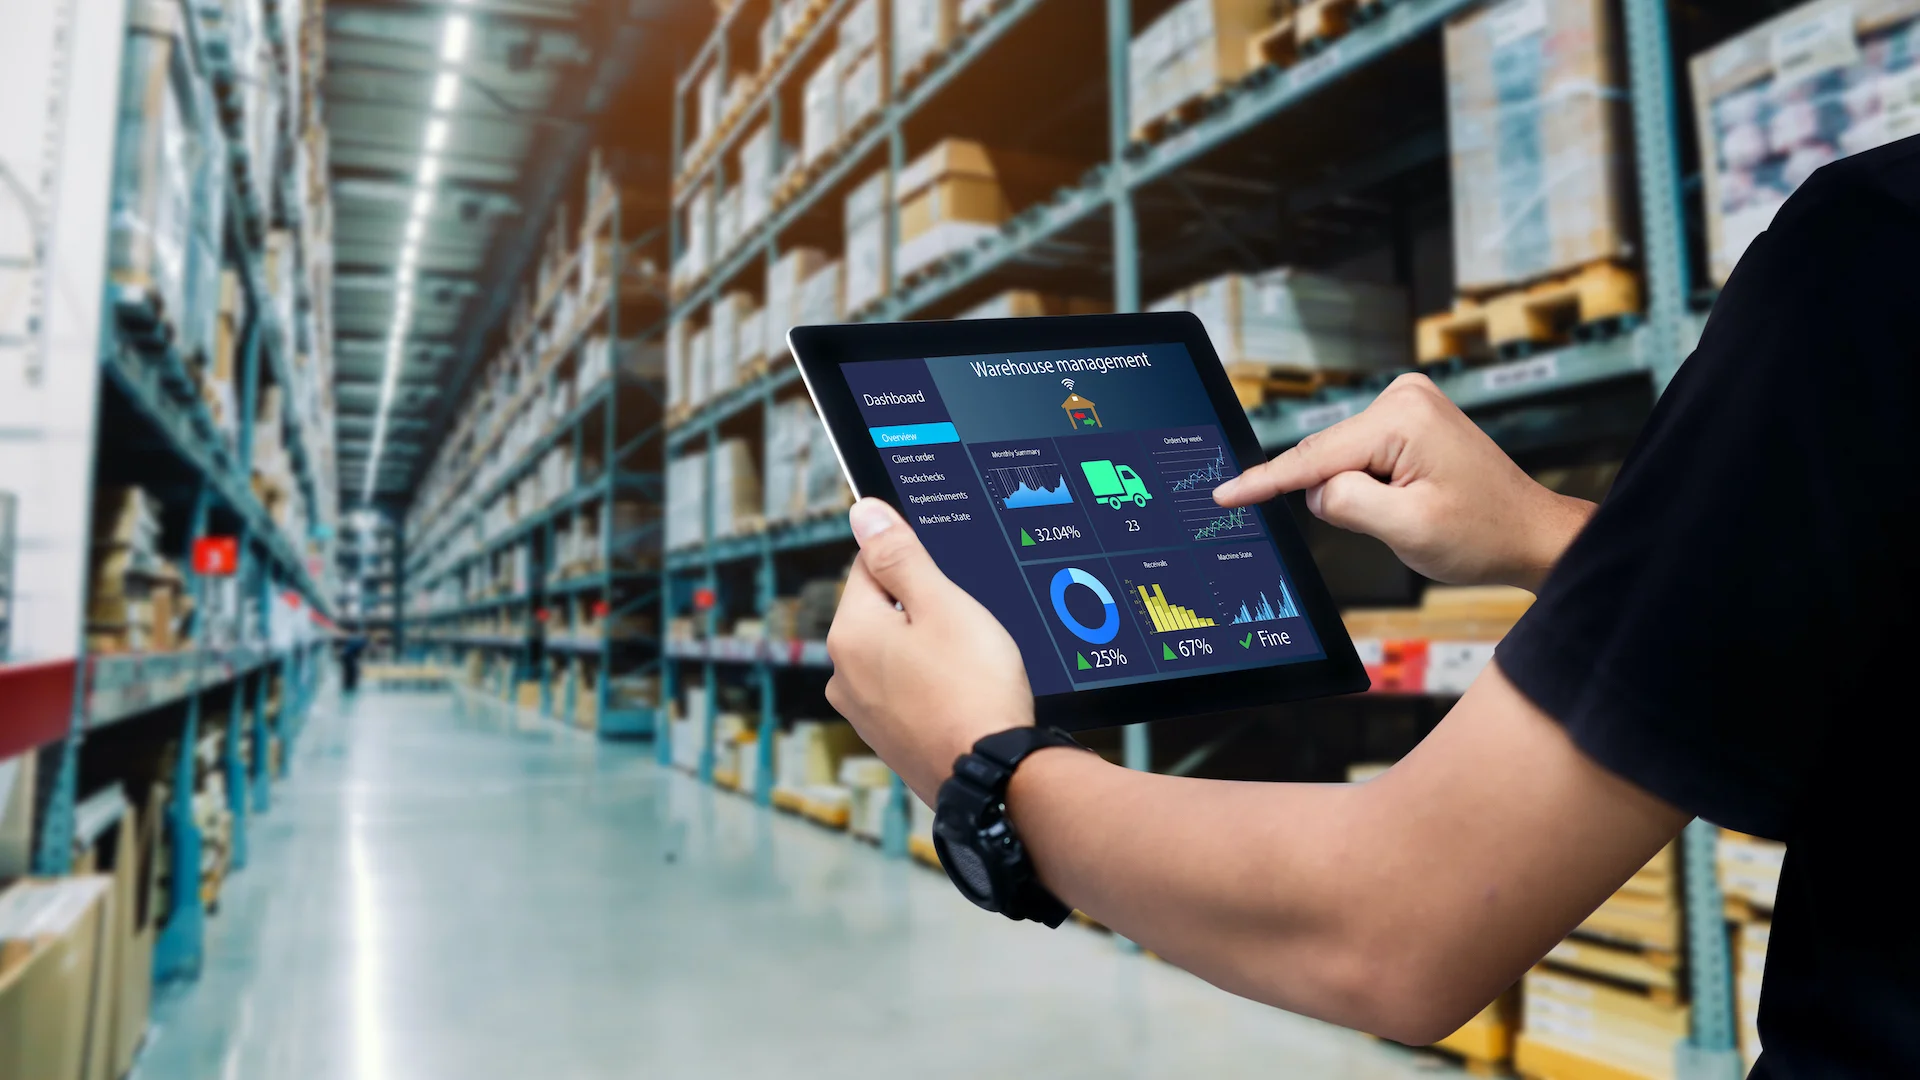 What is the role of technology in supply chain management?